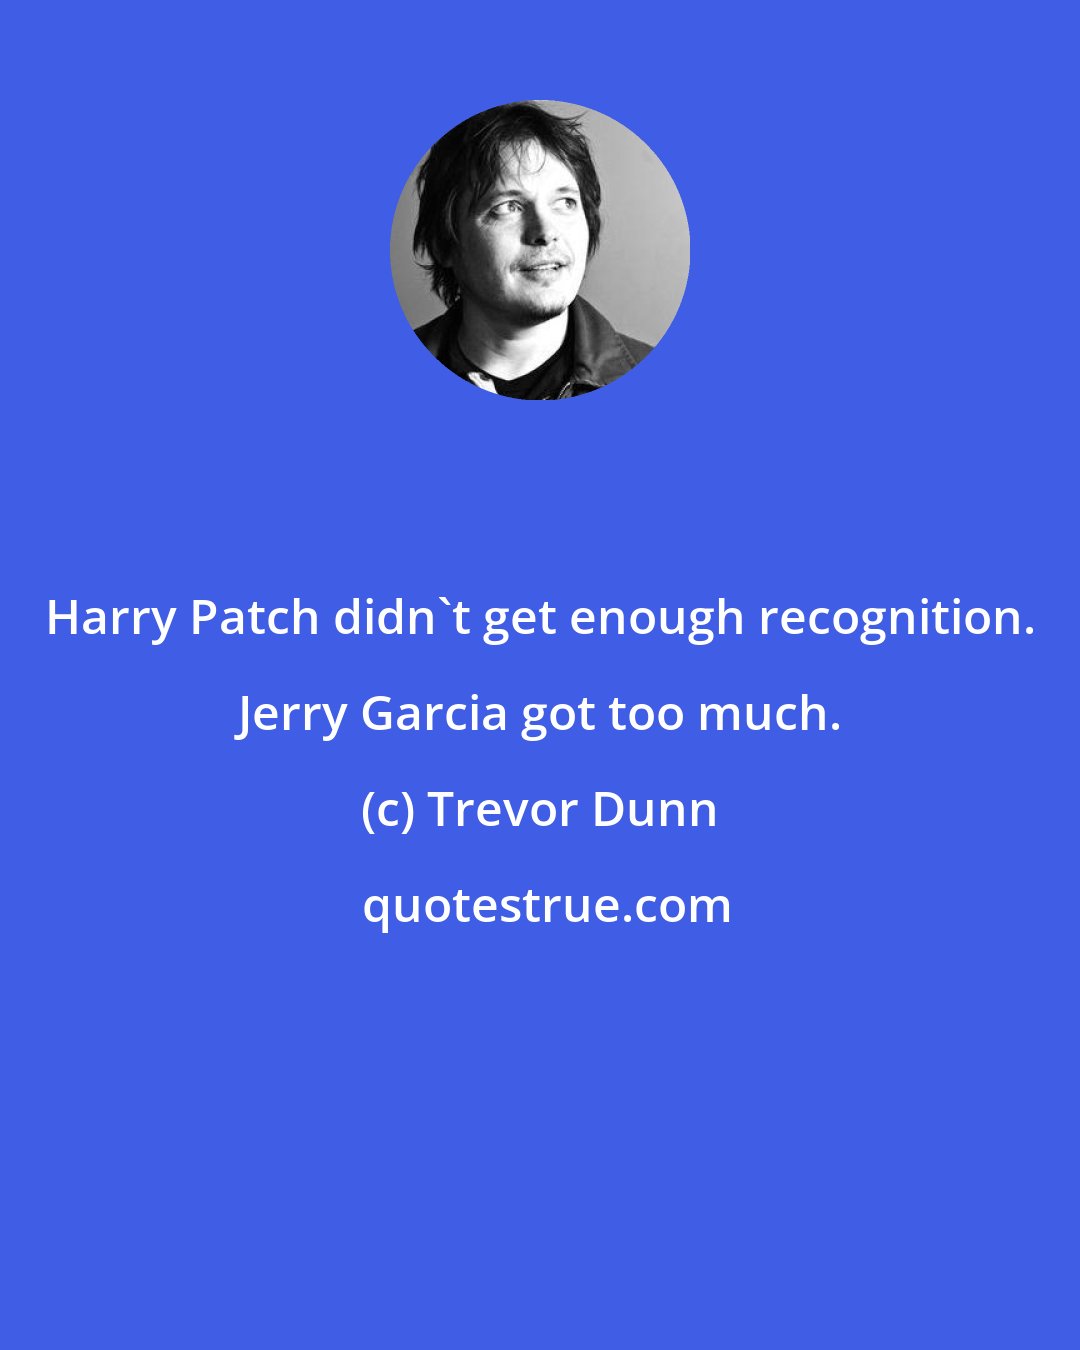 Trevor Dunn: Harry Patch didn't get enough recognition. Jerry Garcia got too much.